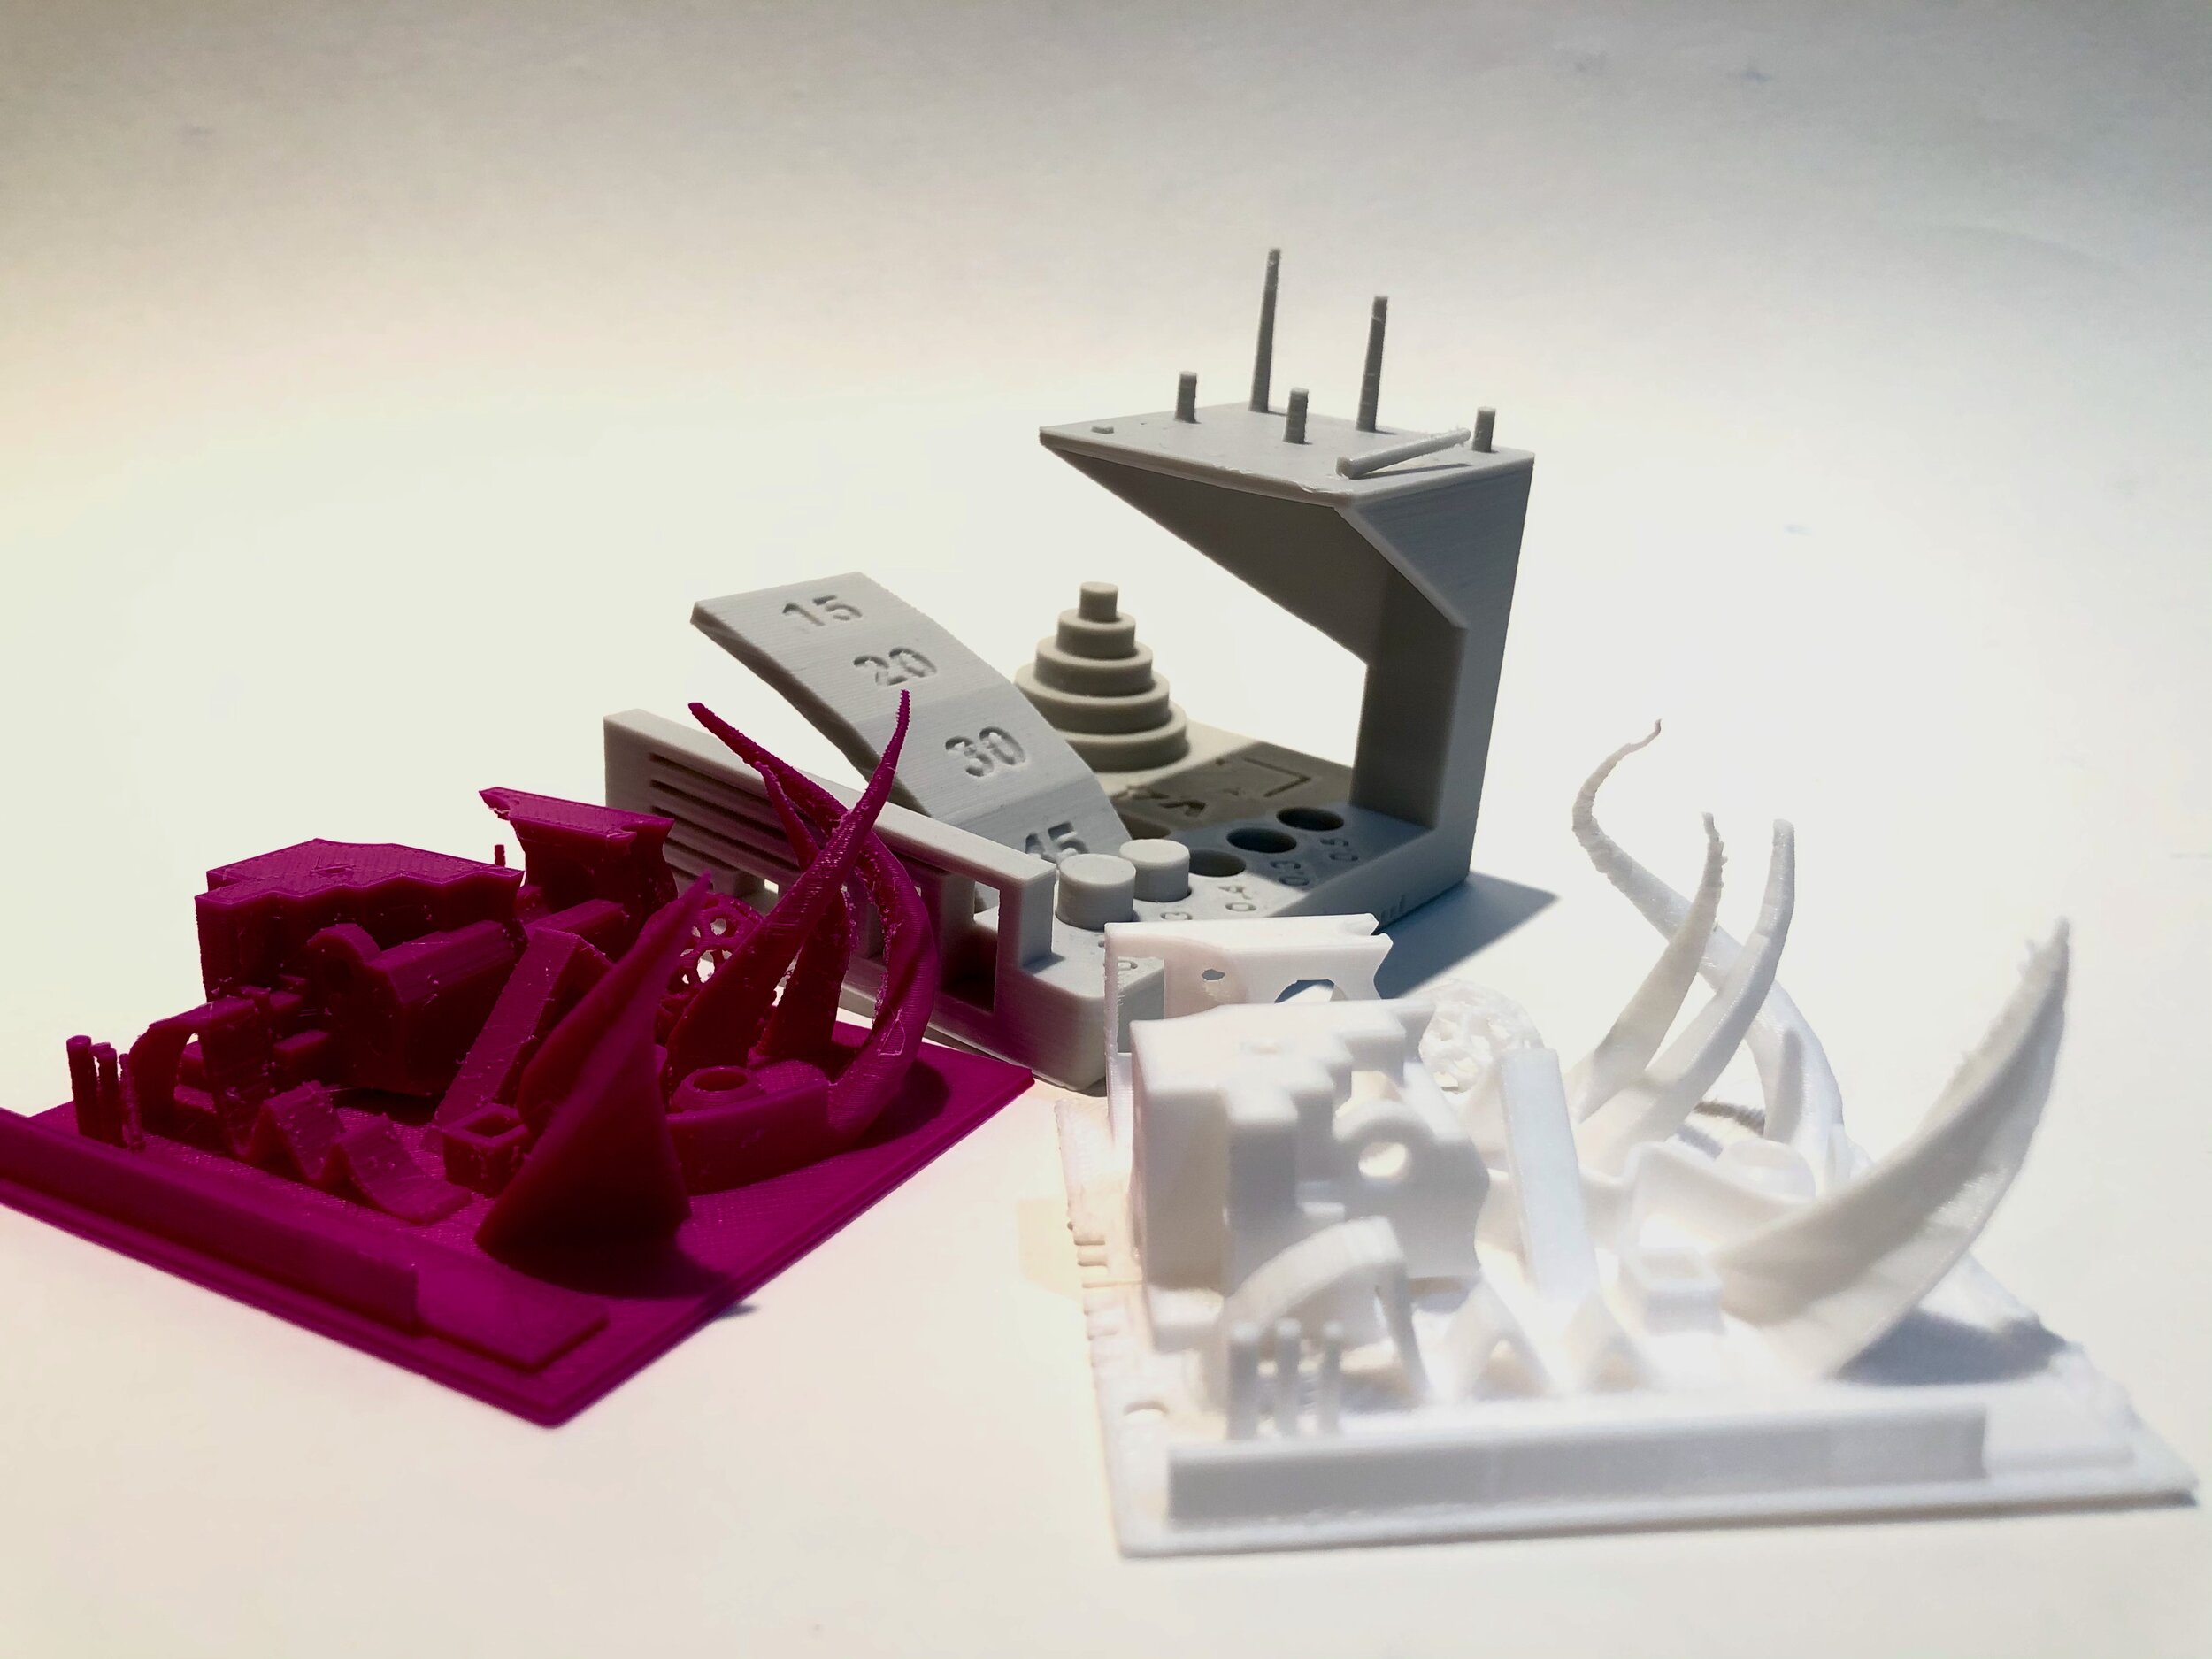  Some more complex test objects for calibrating a 3D printer [Source: Fabbaloo] 